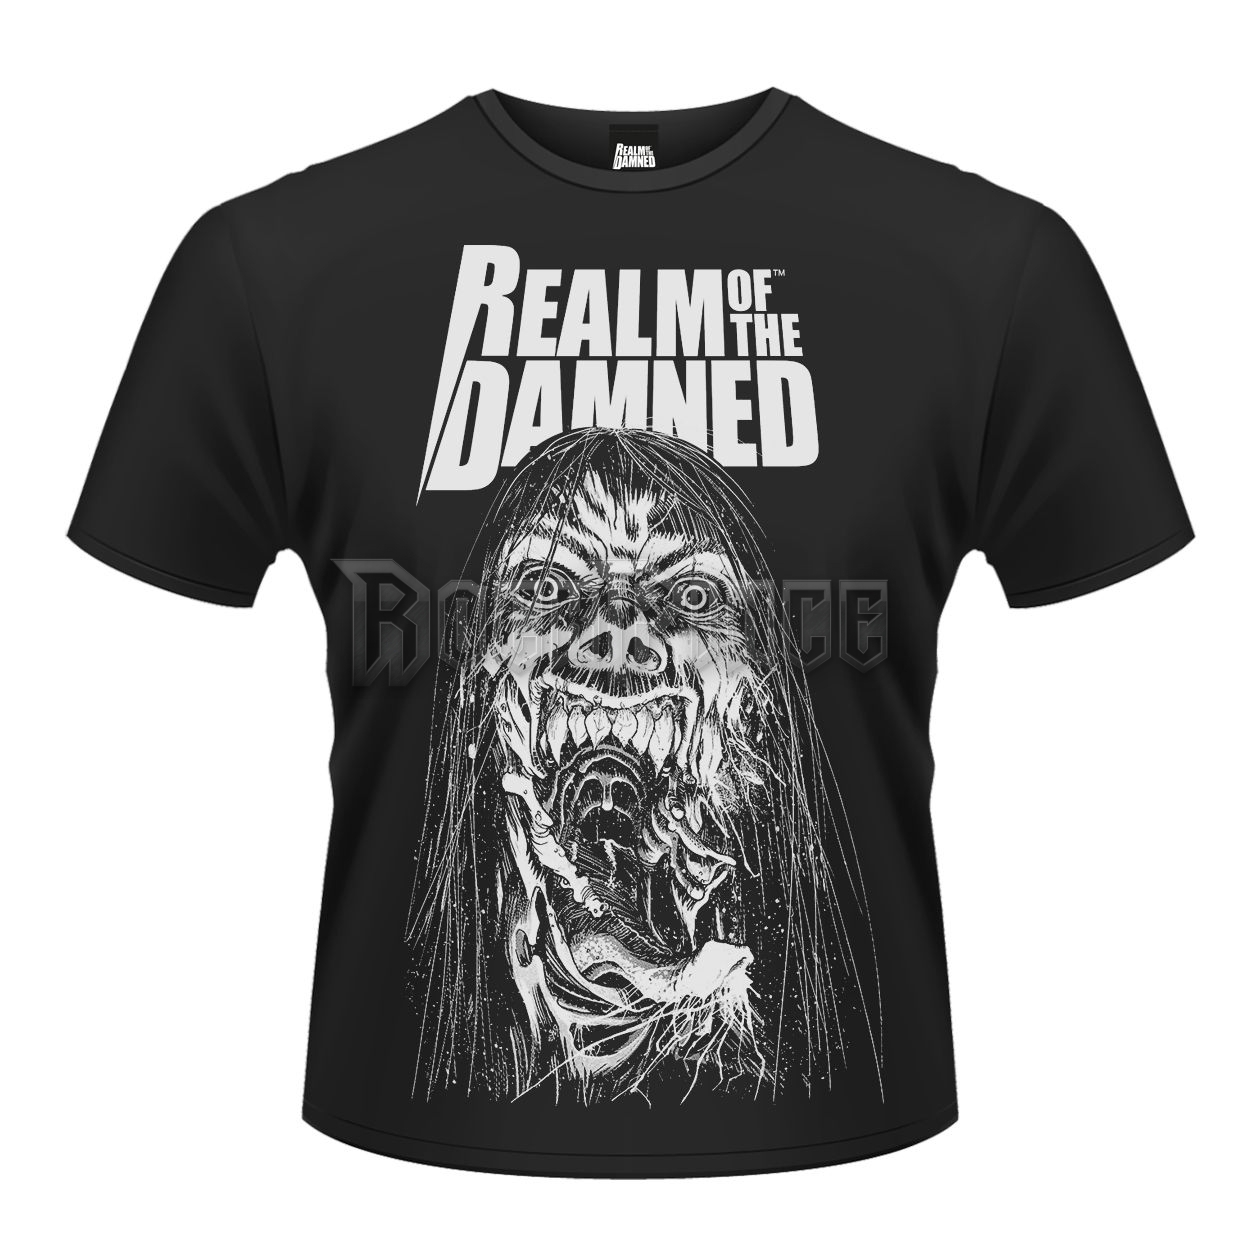 PLAN 9 - REALM OF THE DAMNED - REALM OF THE DAMNED 4 - PH9652